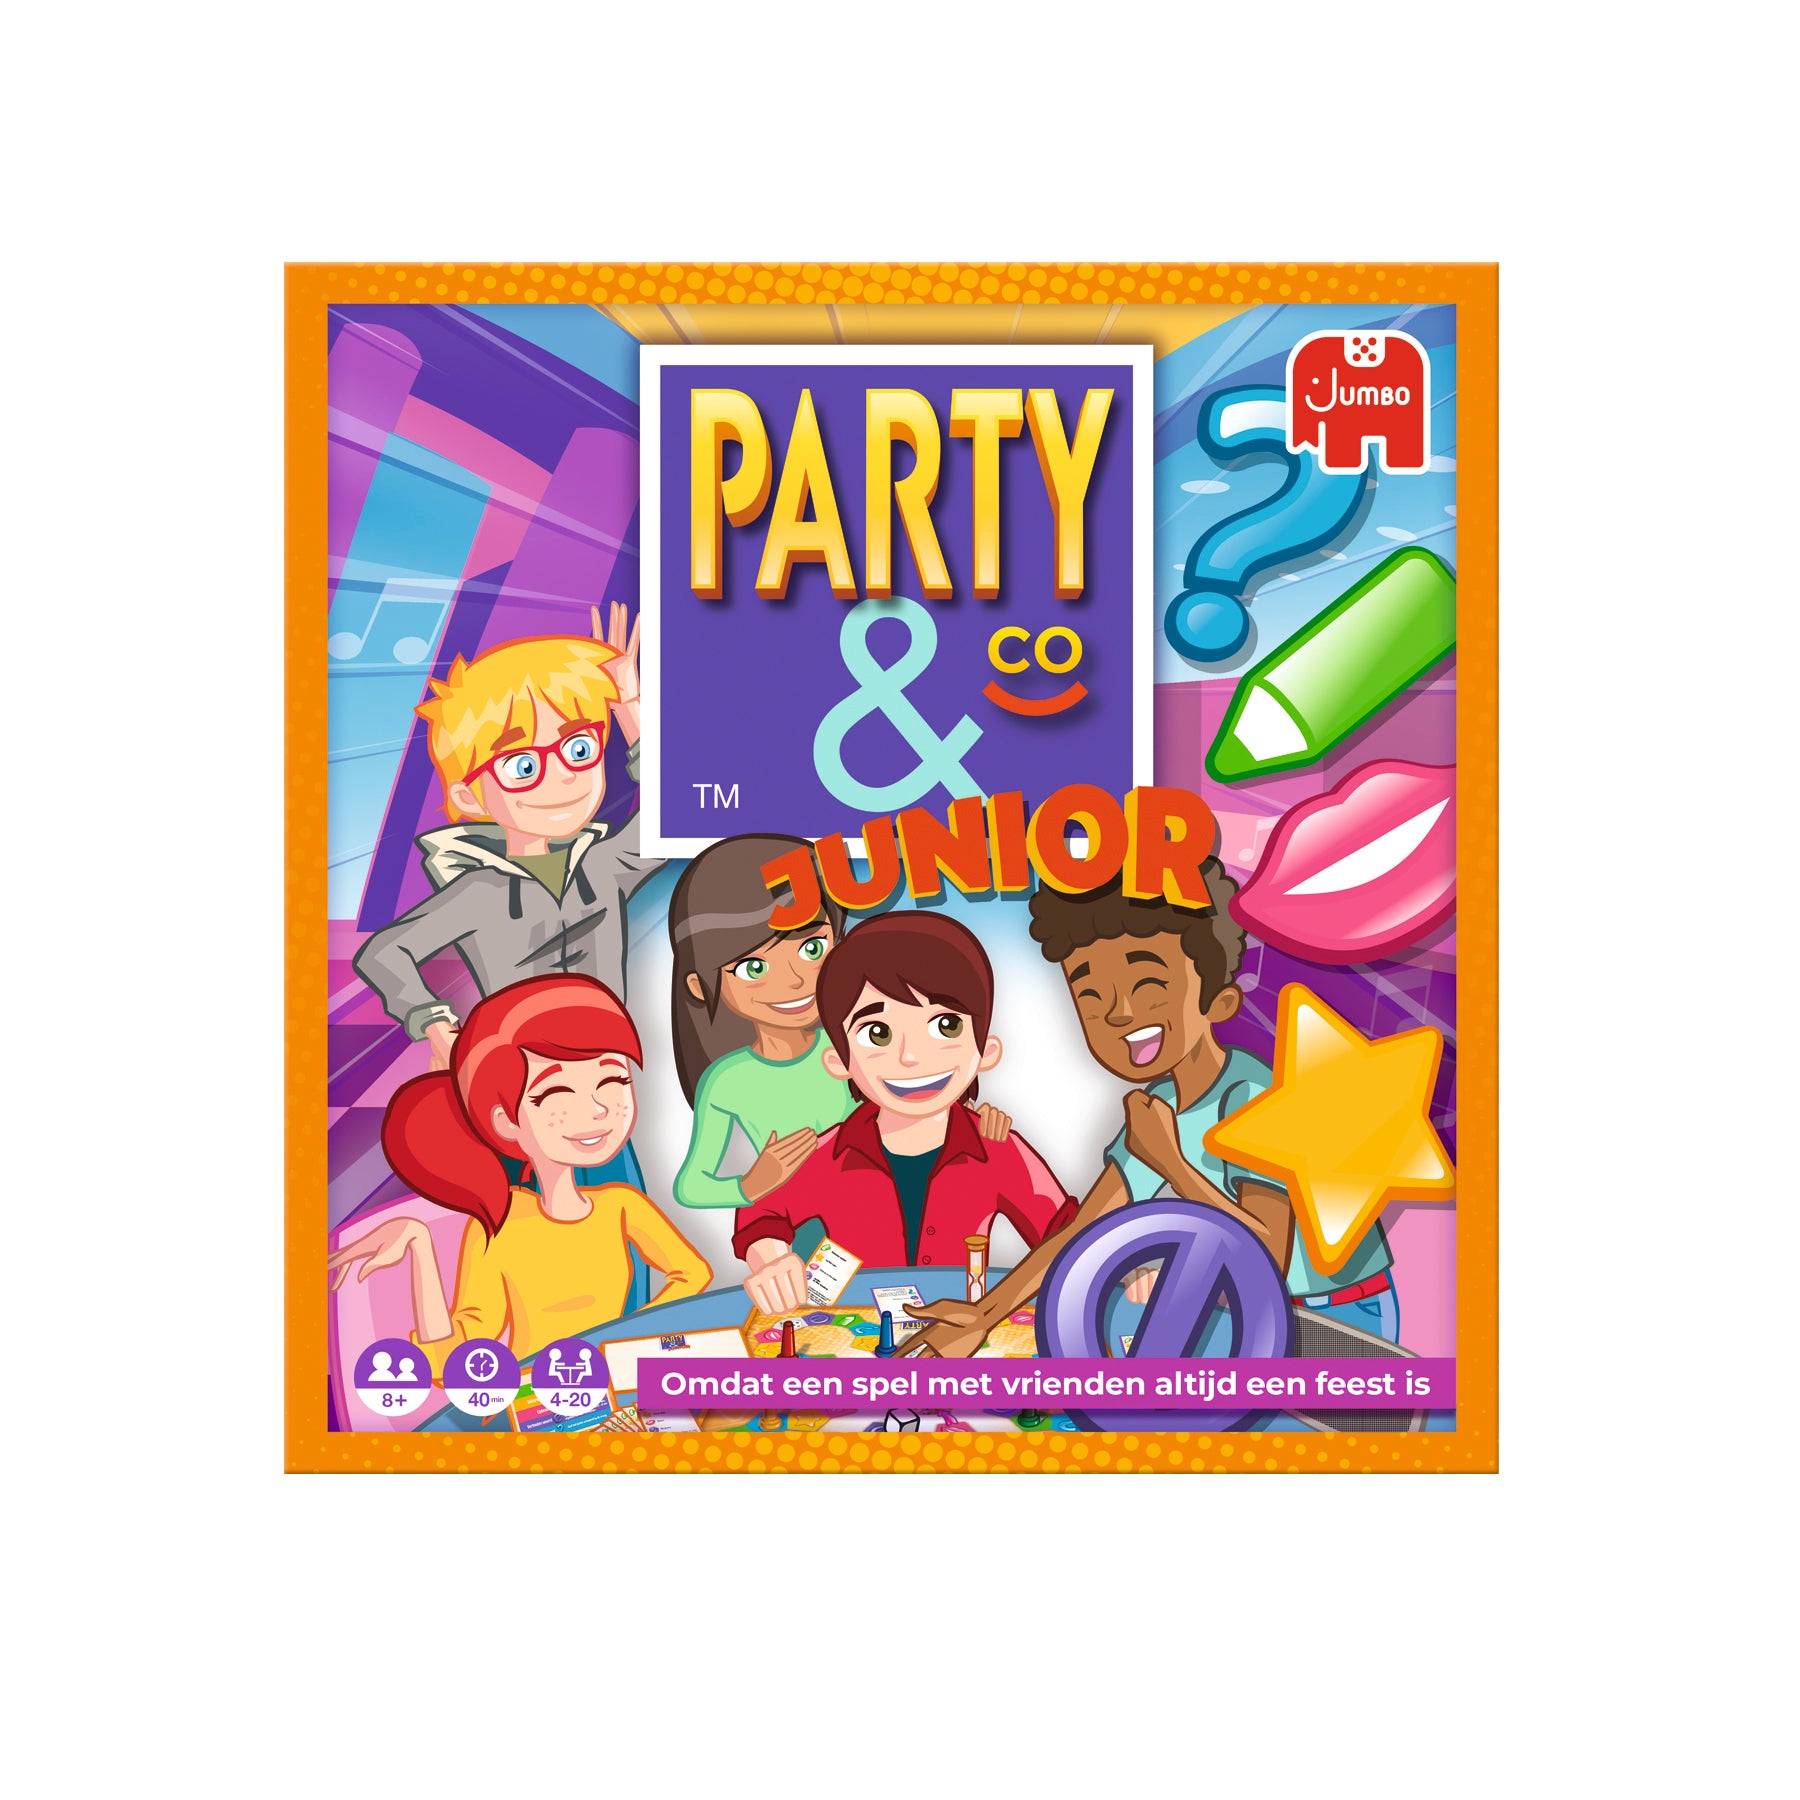 Party & Co. Junior - NL - product image - Jumboplay.com